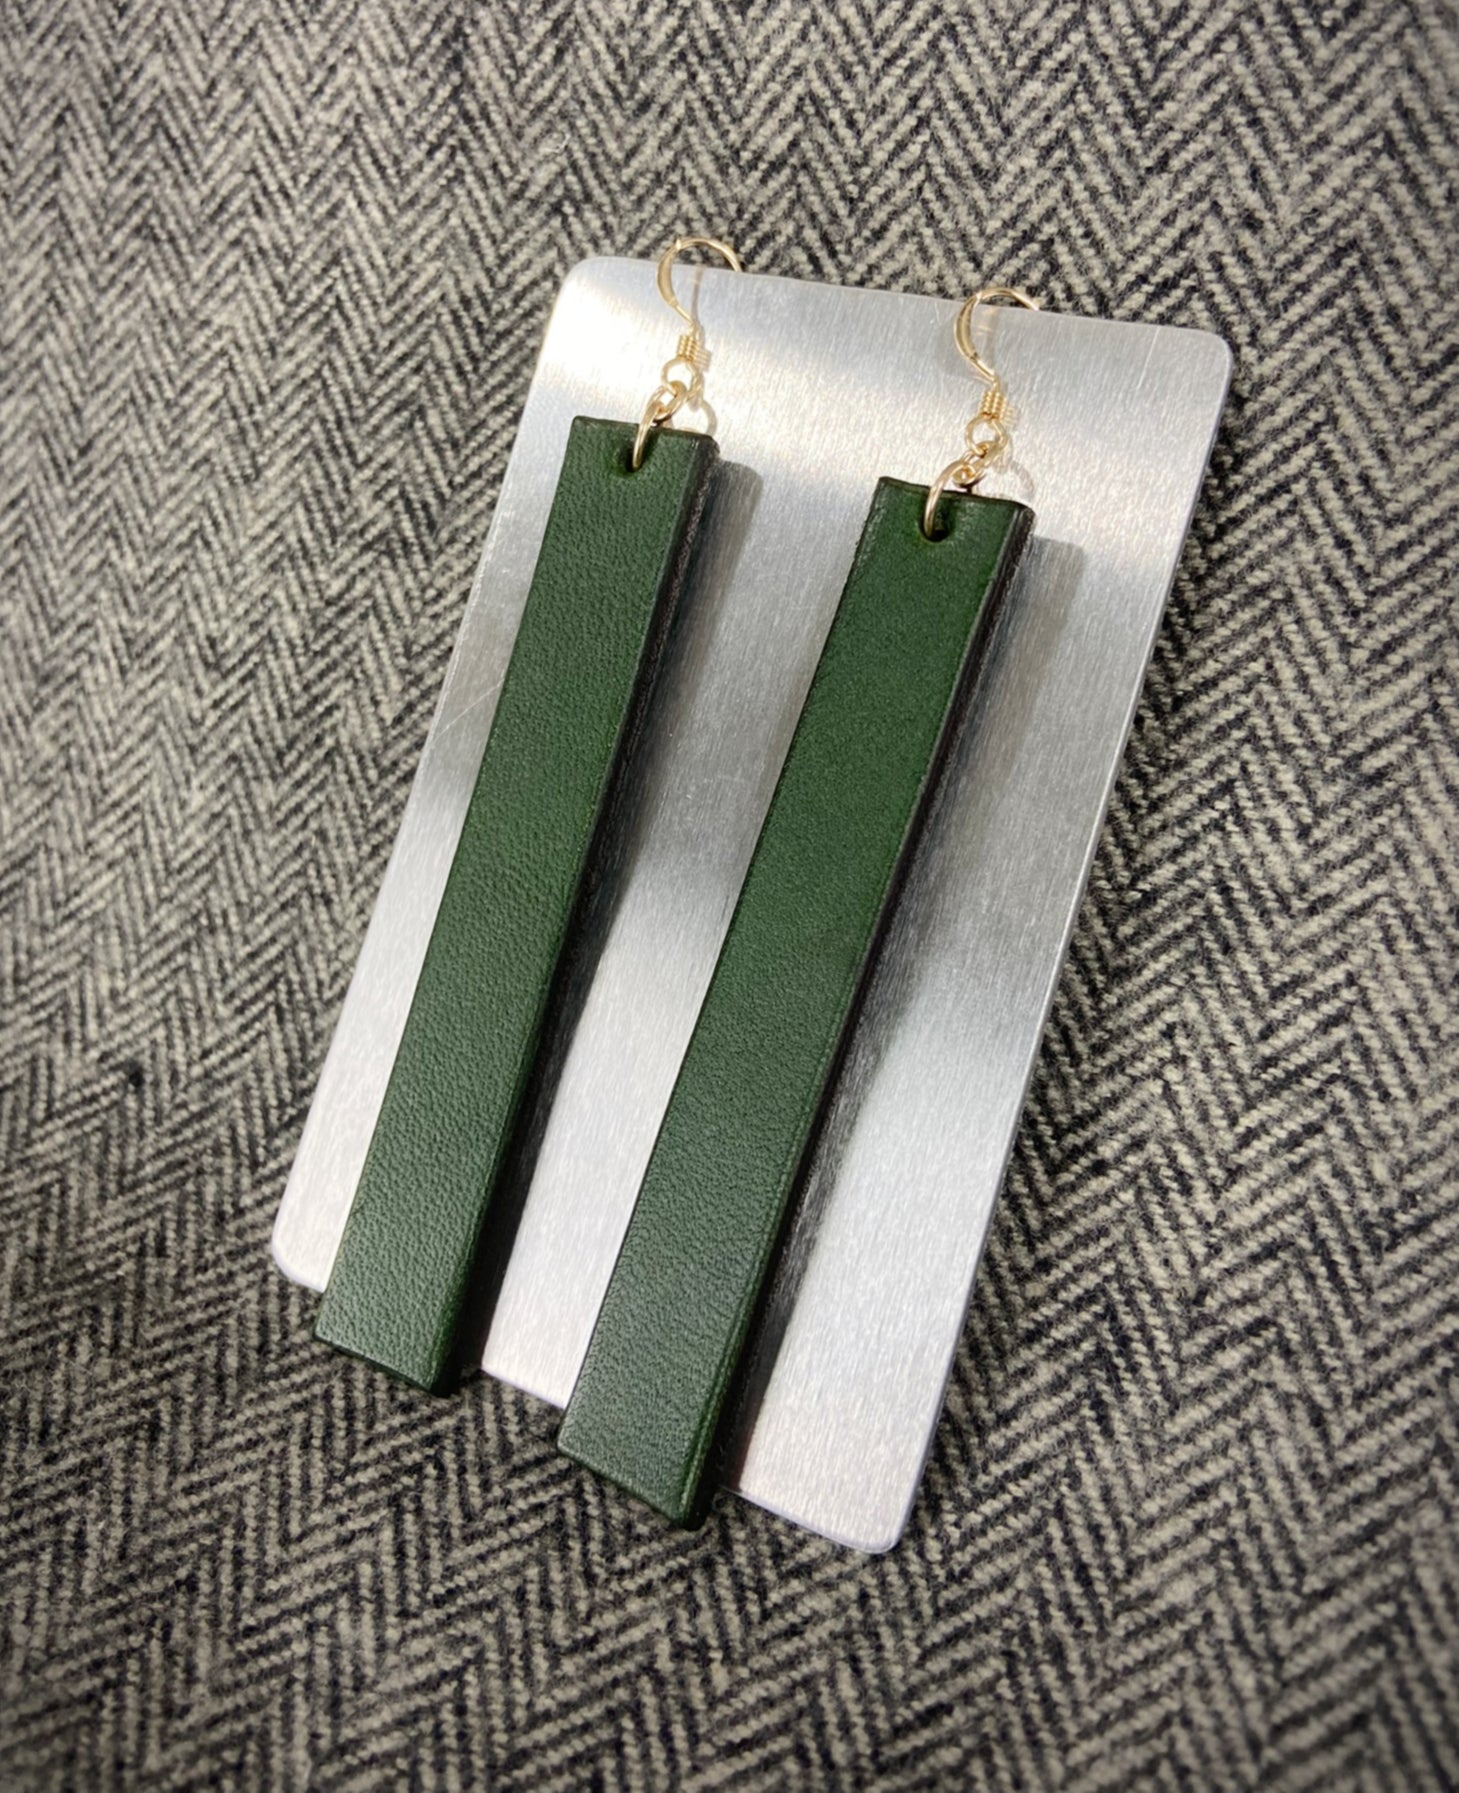 Rectangle earrings handcrafted full grain leather earrings with 14Kt gold hooks and findings made by a local artisan in New Hampshire, USA